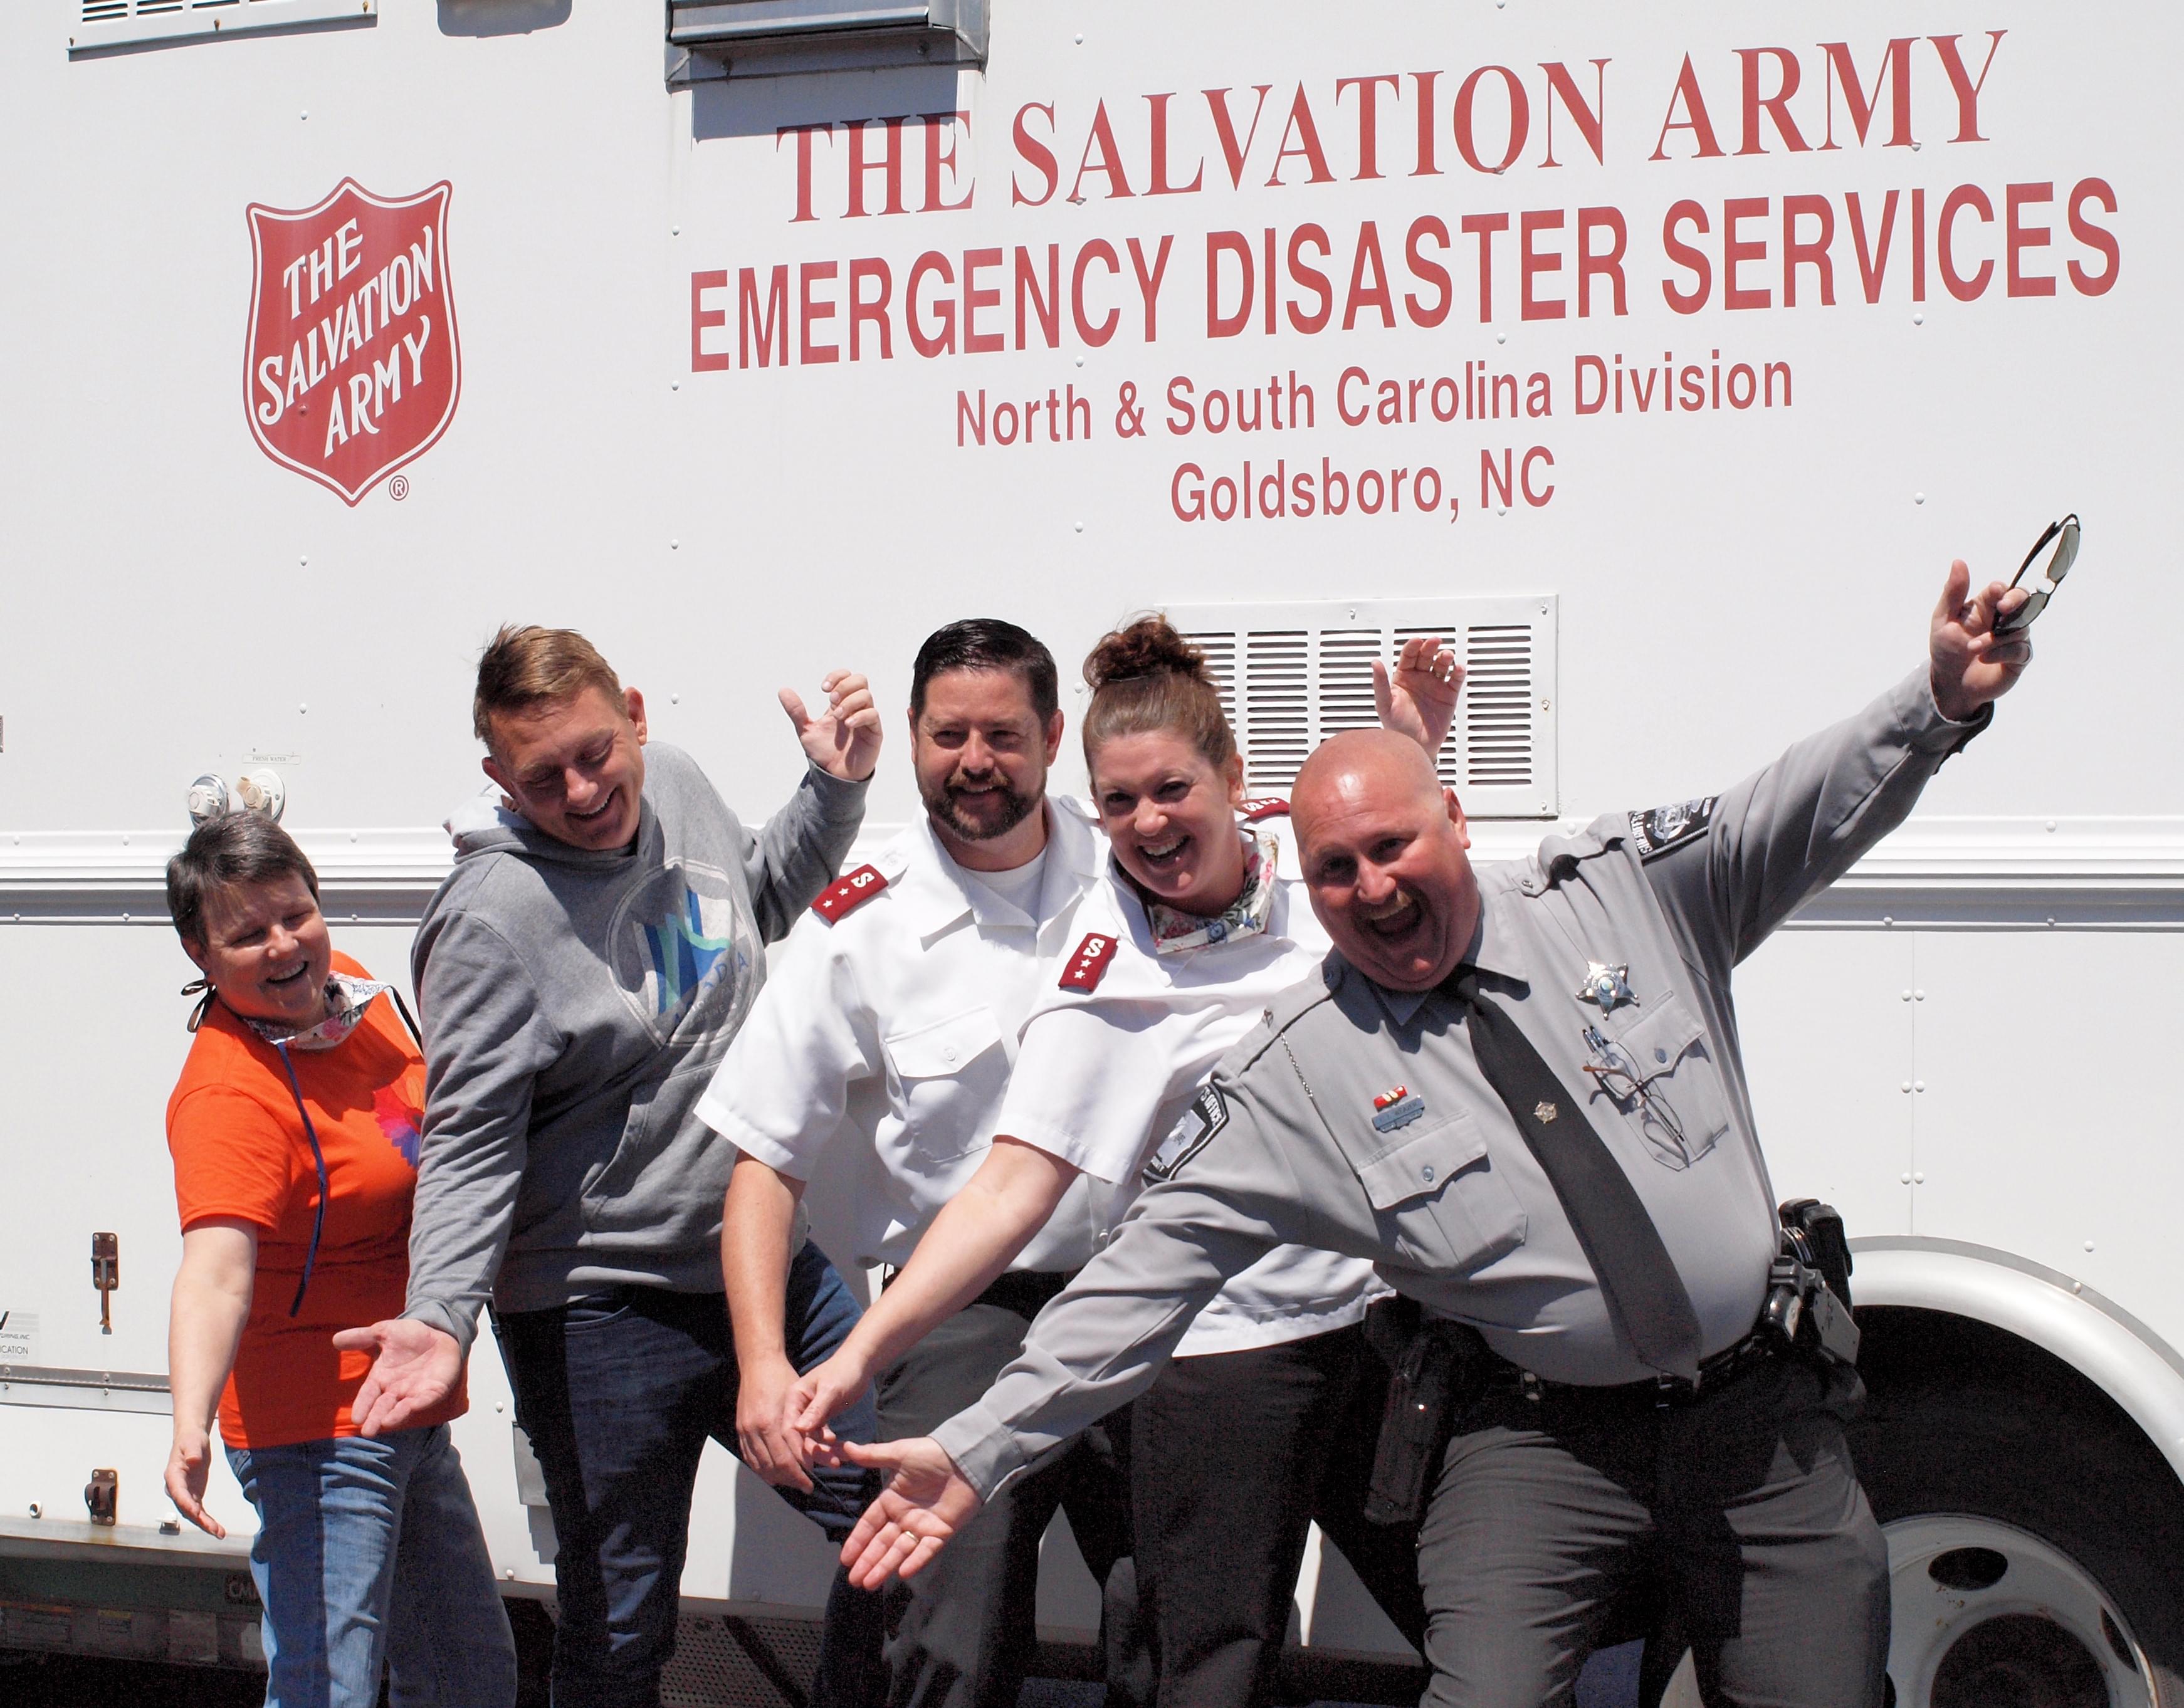 The Salvation Army: Continuing The Mission During COVID-19